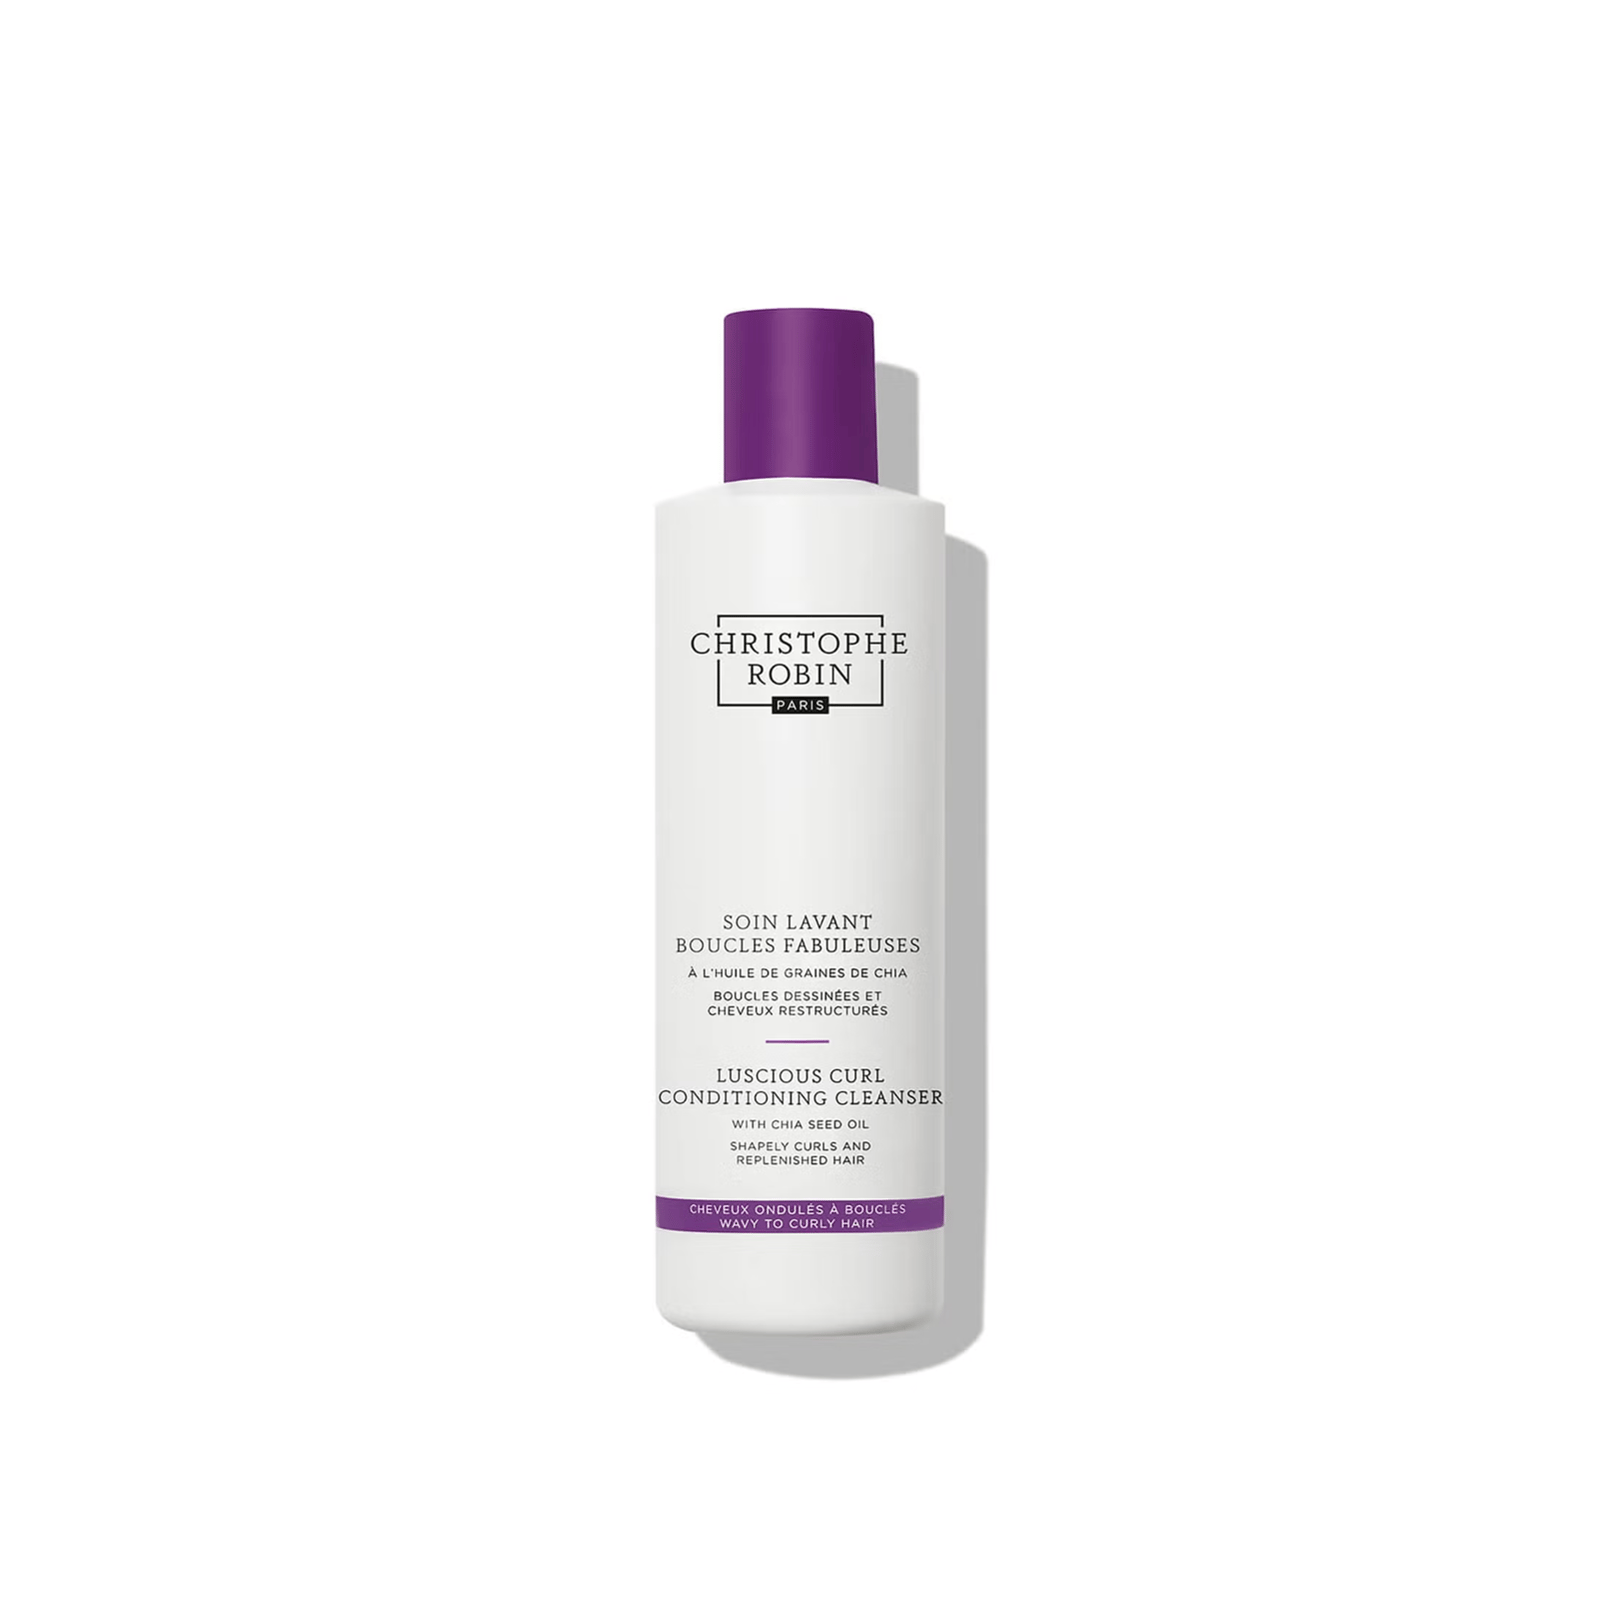 Christophe Robin Luscious Curl Conditionning Cleanser 250ml (8.4 fl oz)